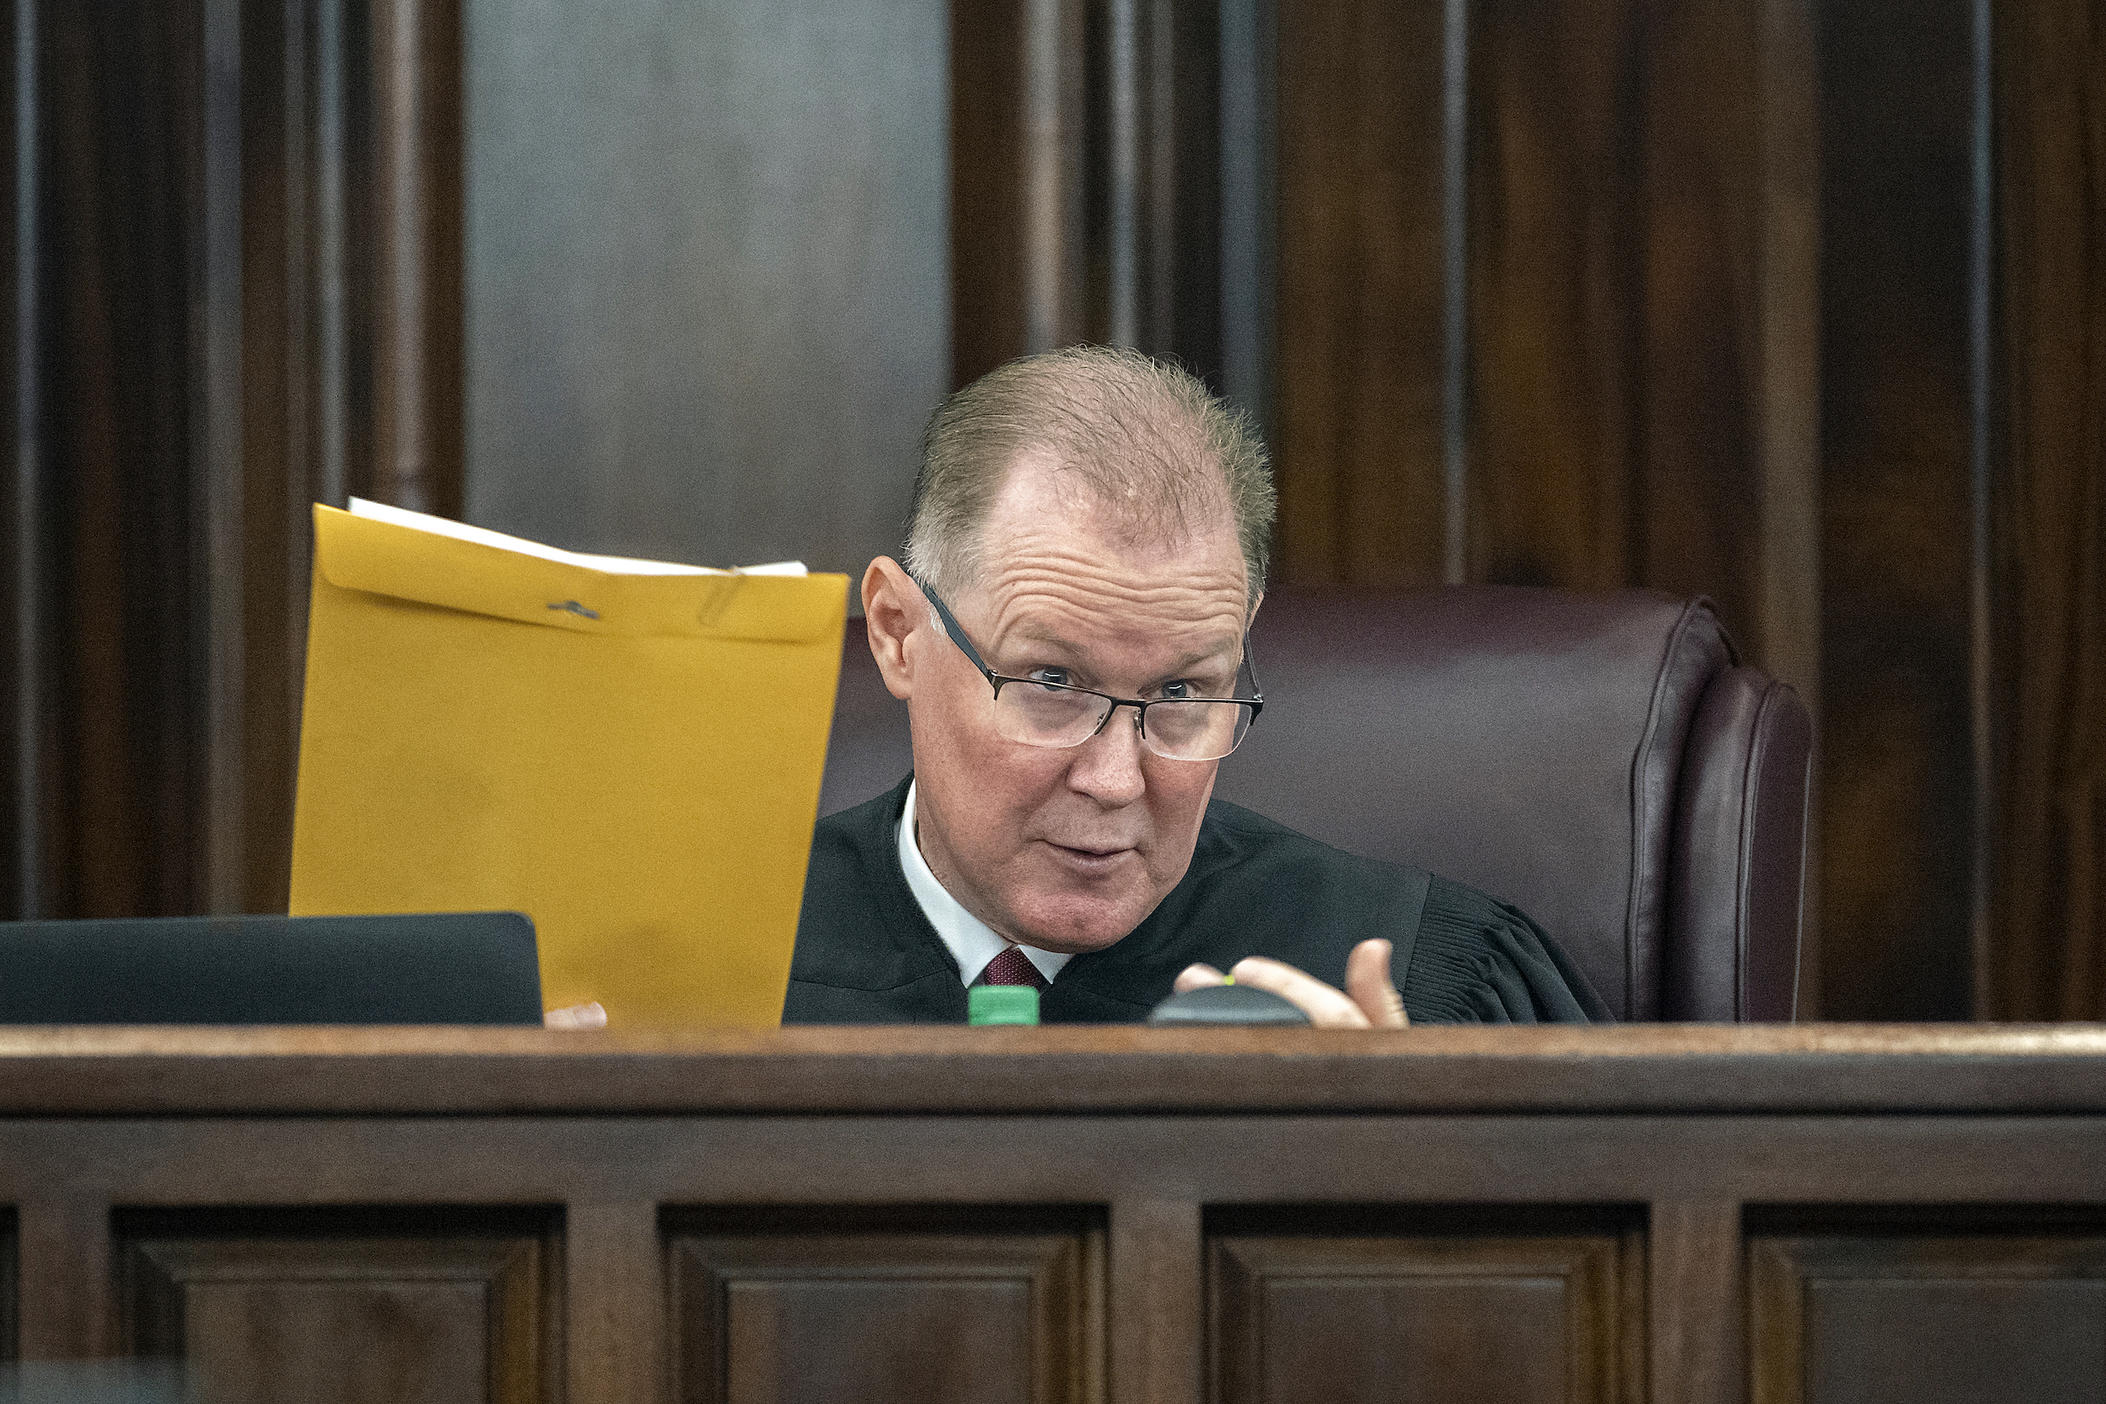 Superior Court Judge Timothy Walmsley speaks with attorneys before the start of closing arguments during the trial of Greg McMichael, his son Travis McMichael, and William "Roddie" Bryan, at the Glynn County Courthouse, Monday, Nov. 22, 2021, in Brunswick, Ga.